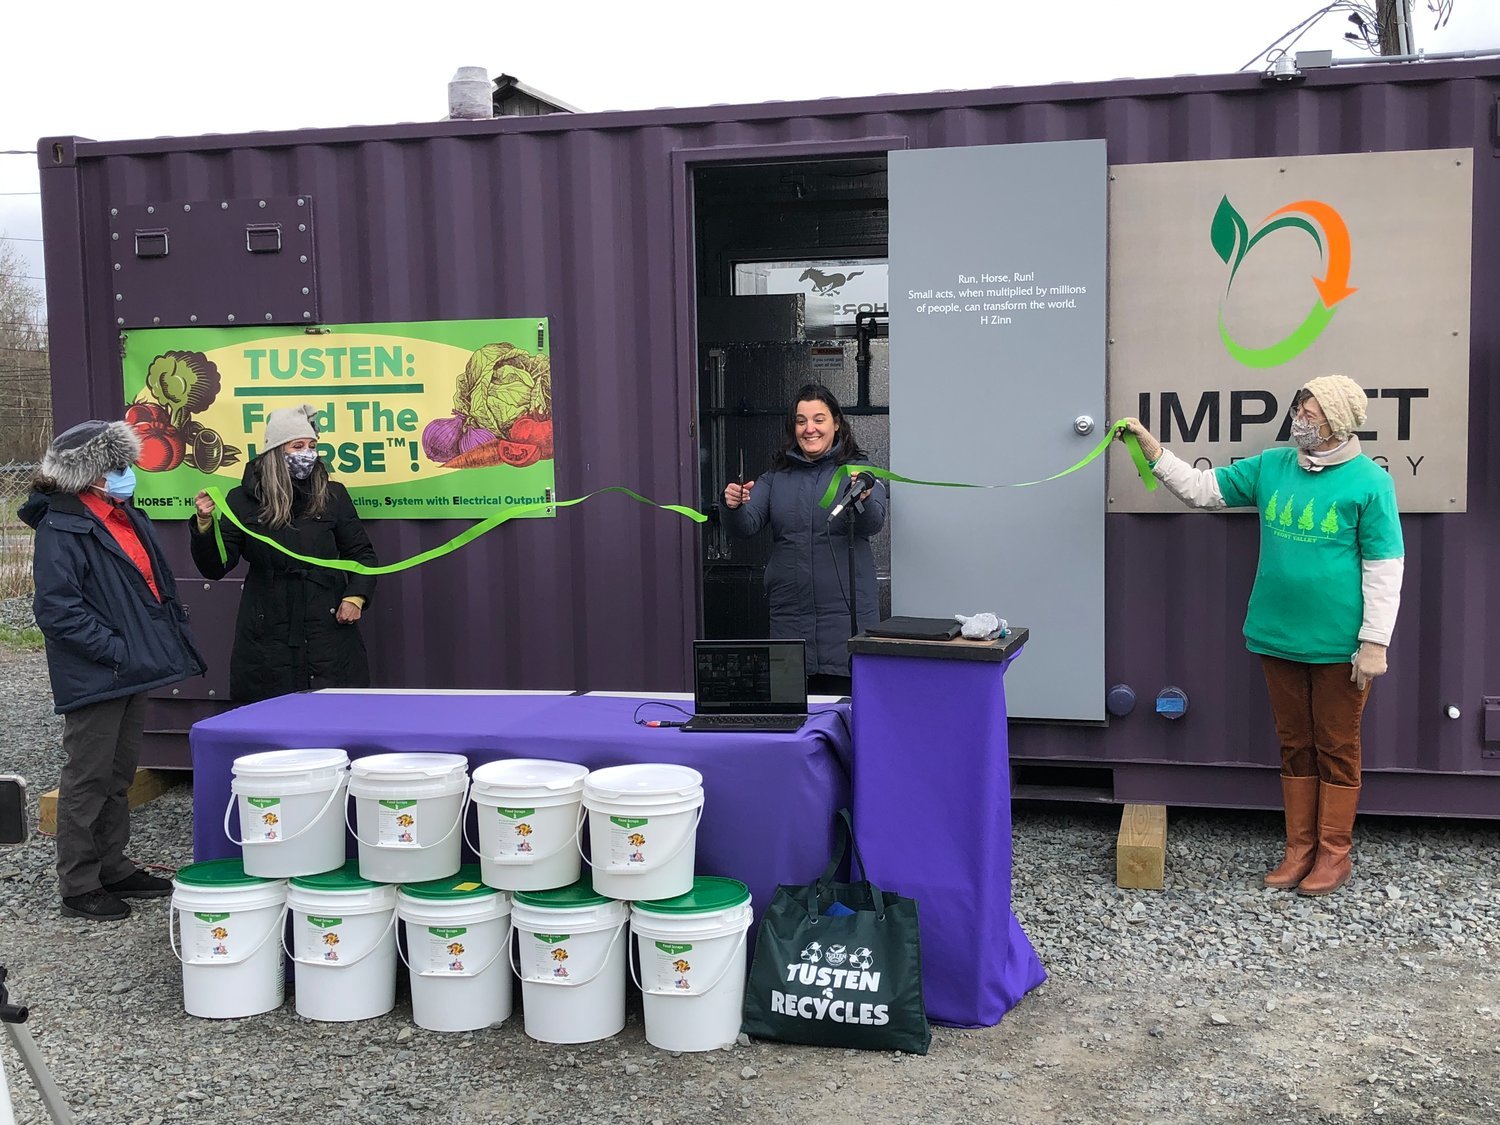 Catherine Lewis and Brandi Merolla, left, and Star Hesse, right, watch as Jennifer Porter cuts the ribbon on April 22, 2021 of the Tusten HORSE. The plan at the time indicated that food waste would be collected in five-gallon food-grade buckets, donated by Weiss Markets’ Bakery Department, from seven different food establishments to start: 2 Queens, Pete’s Market, The Heron, The Laundrette, Blue Fox Motel, Forestburgh Playhouse via Jill Padua, and the Botanist. The digester at full capacity can handle 4000 lbs of food a month, which is 66 buckets a week.